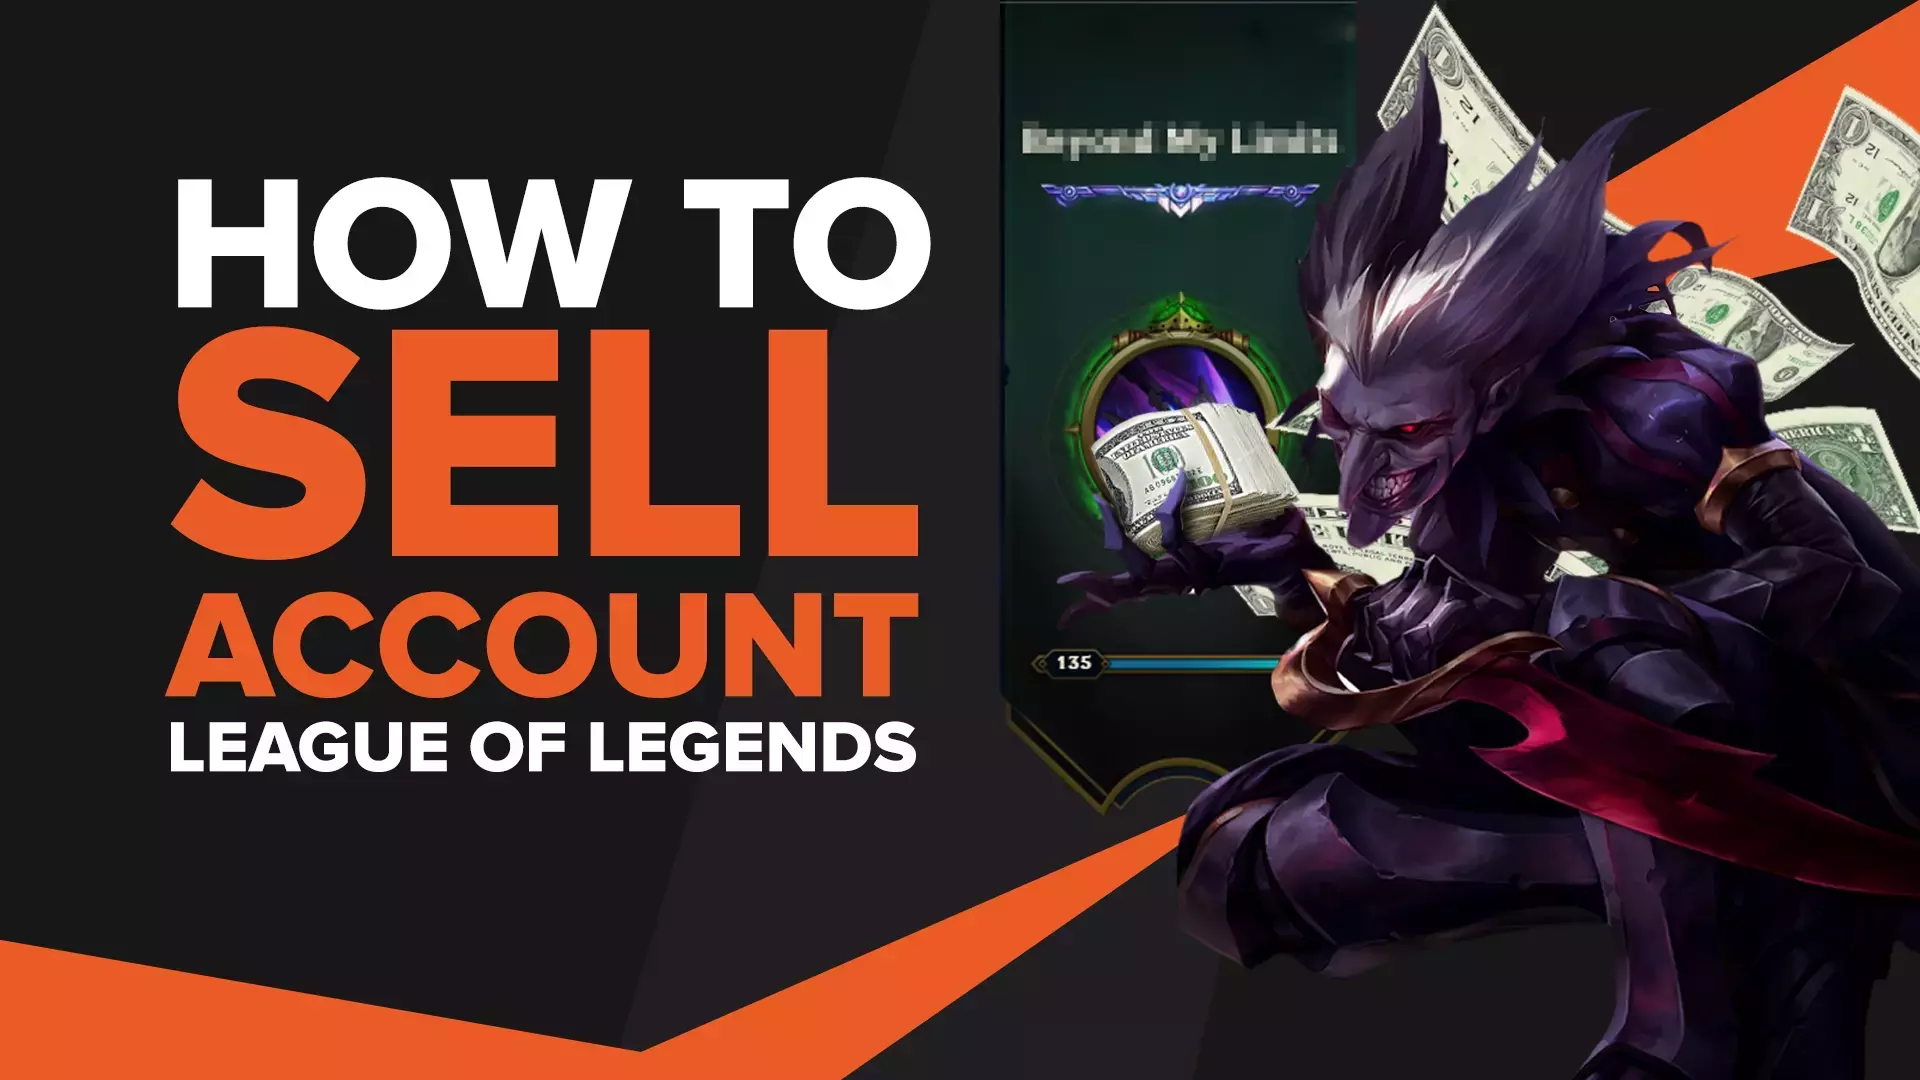 How to Sell a League of Legends Account Fast